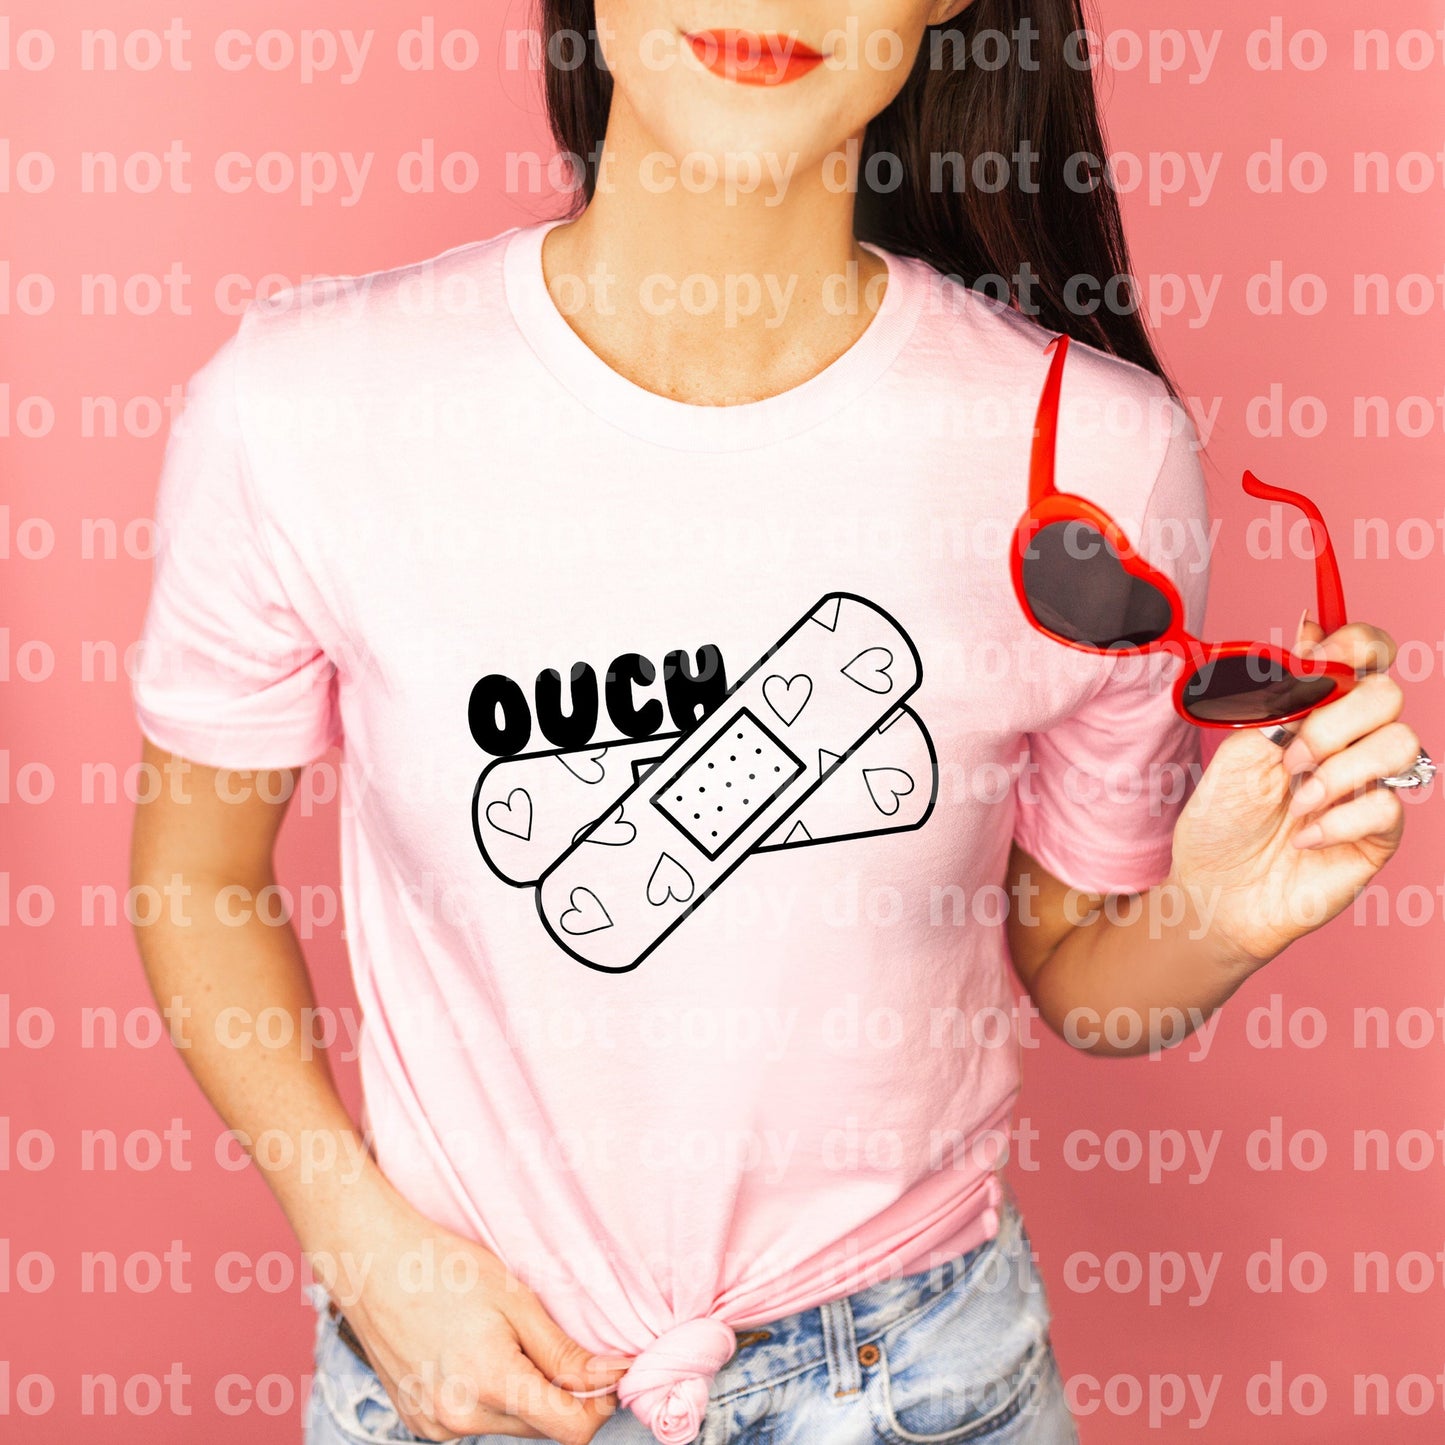 Ouch Band Aid Hearts Full Color/One Color with Pocket Option Dream Print or Sublimation Print